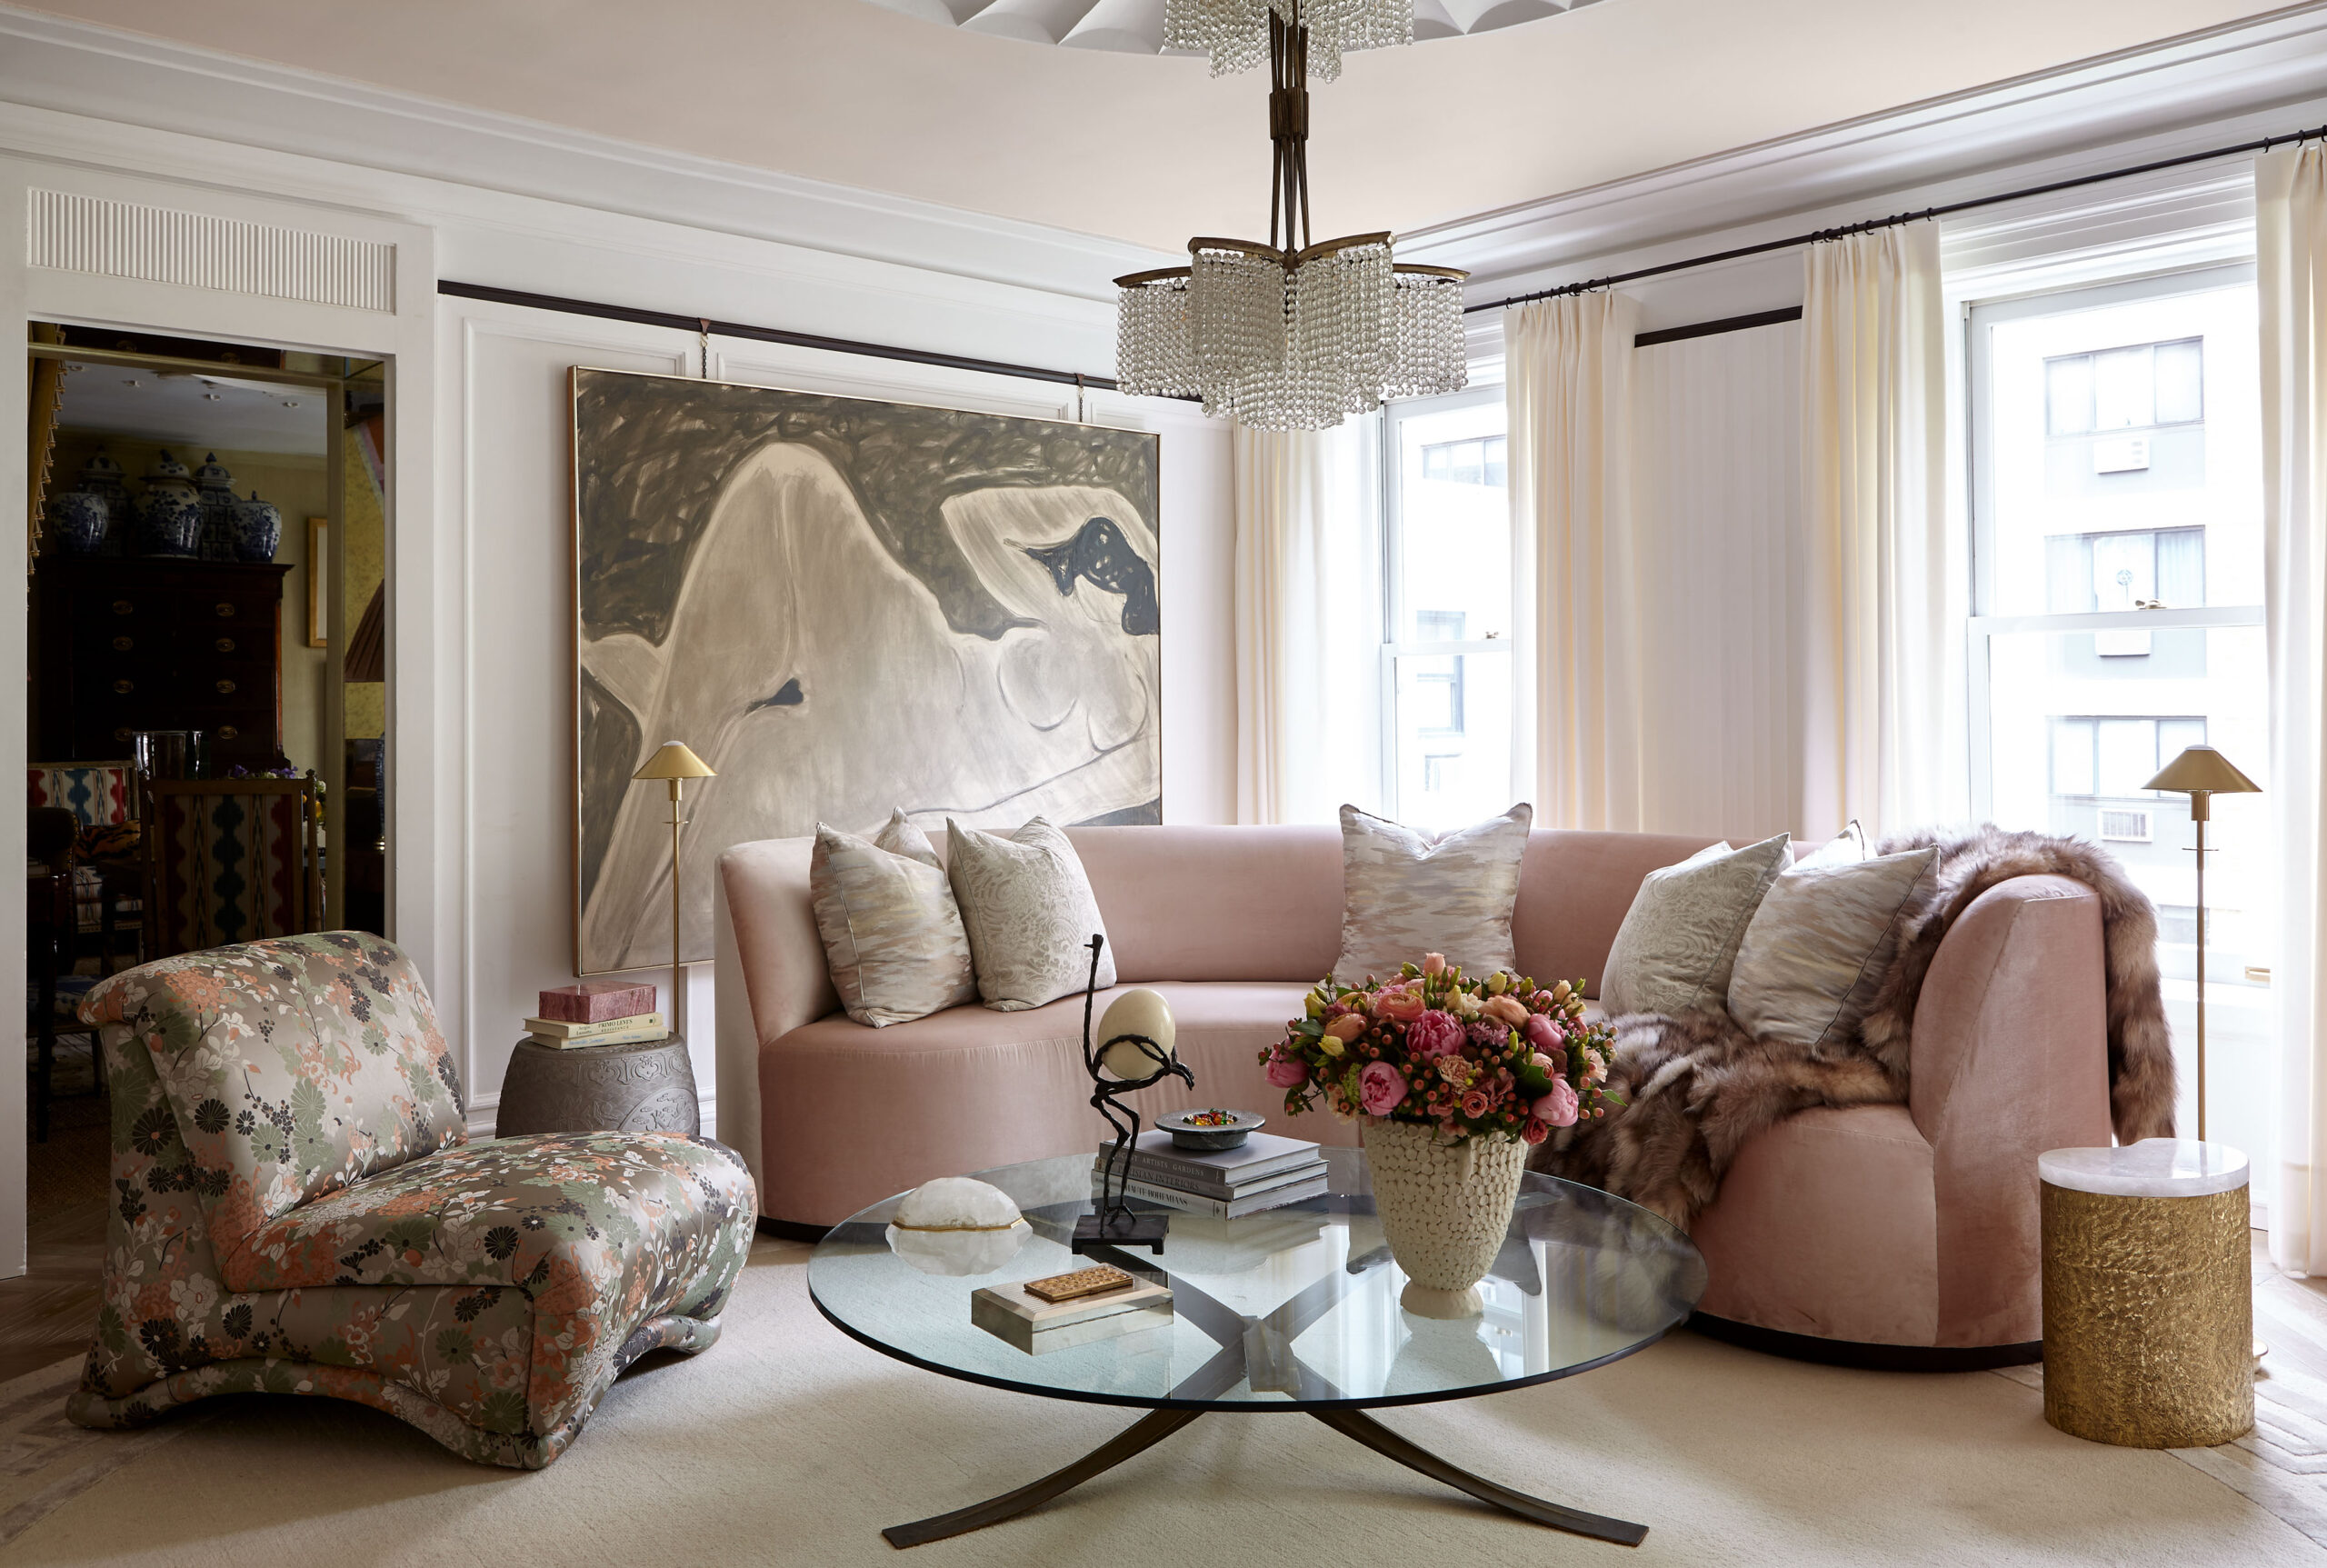 Design by Robert Passal and architect Daniel Kahan for the 2019 Kips Bay Decorator Show House